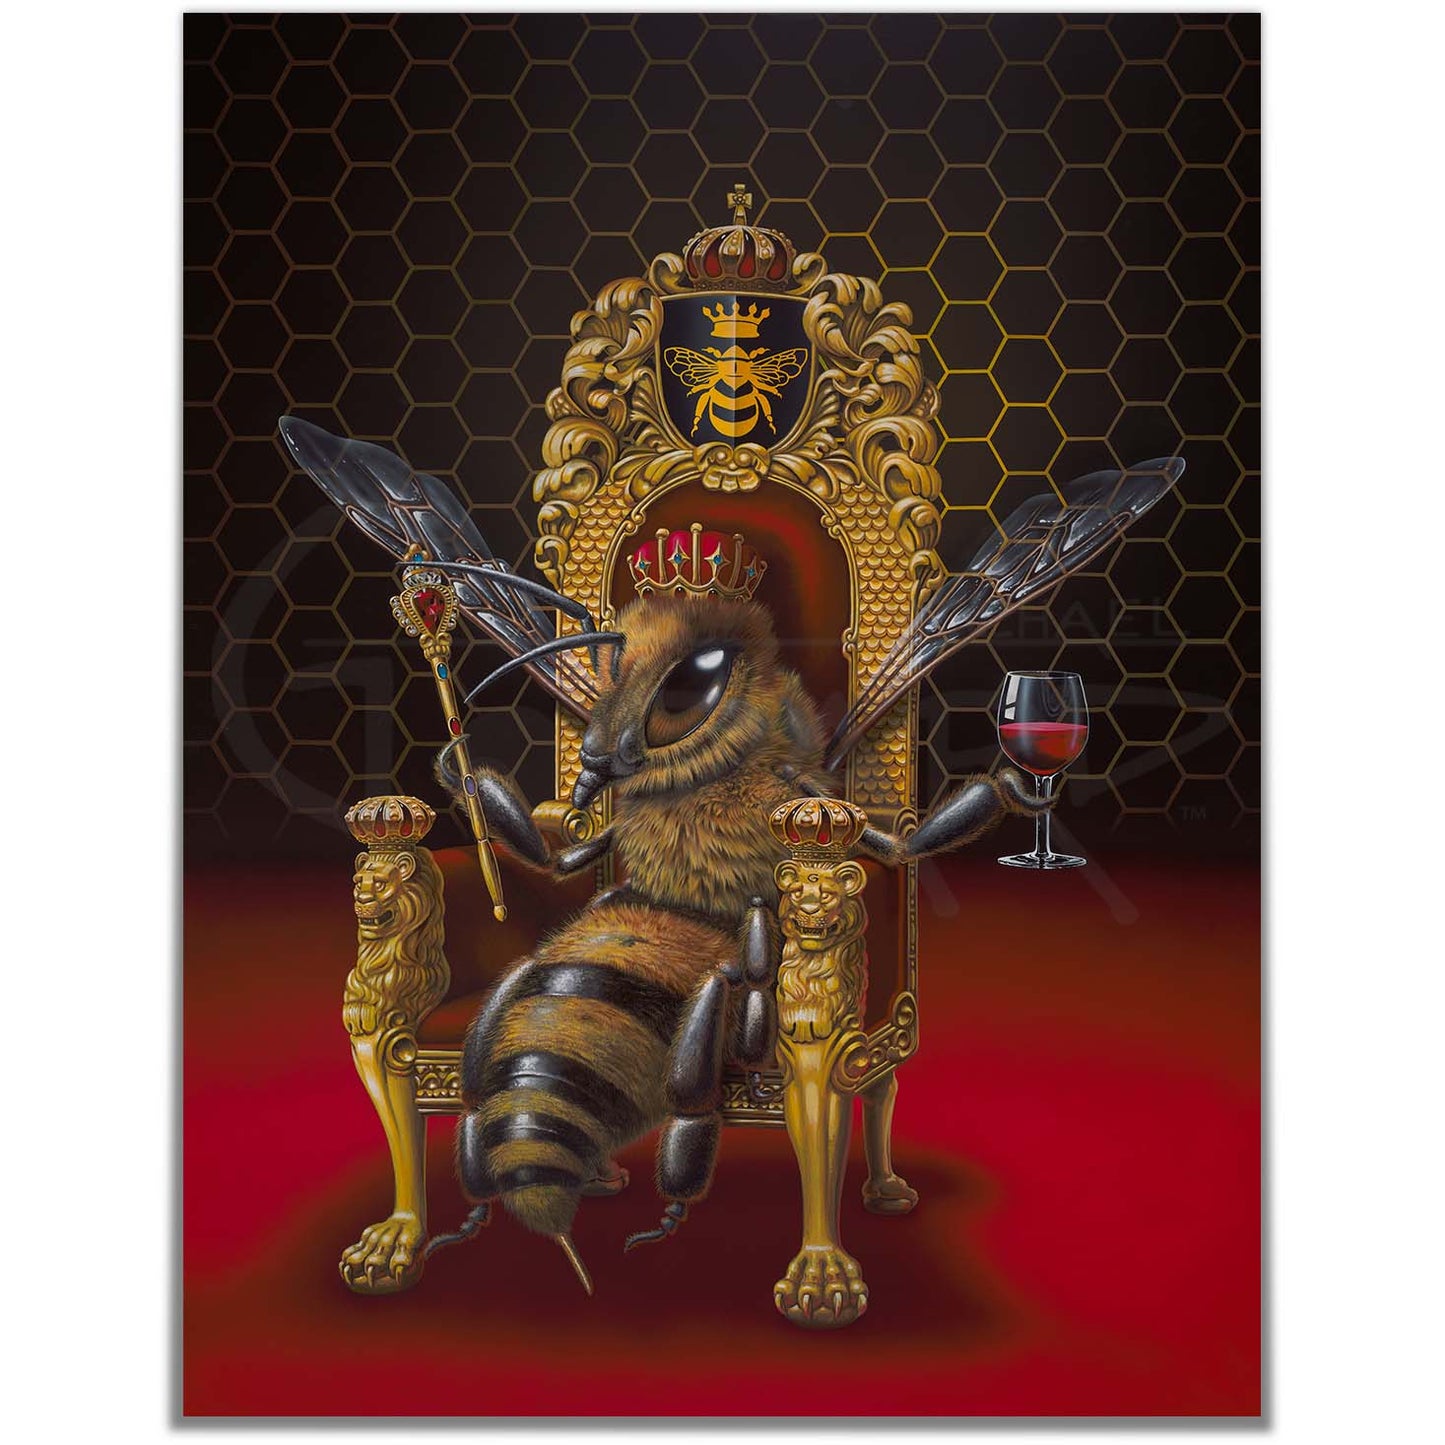 Michael Godard "Queen Bee" Limited Edition Canvas Giclee